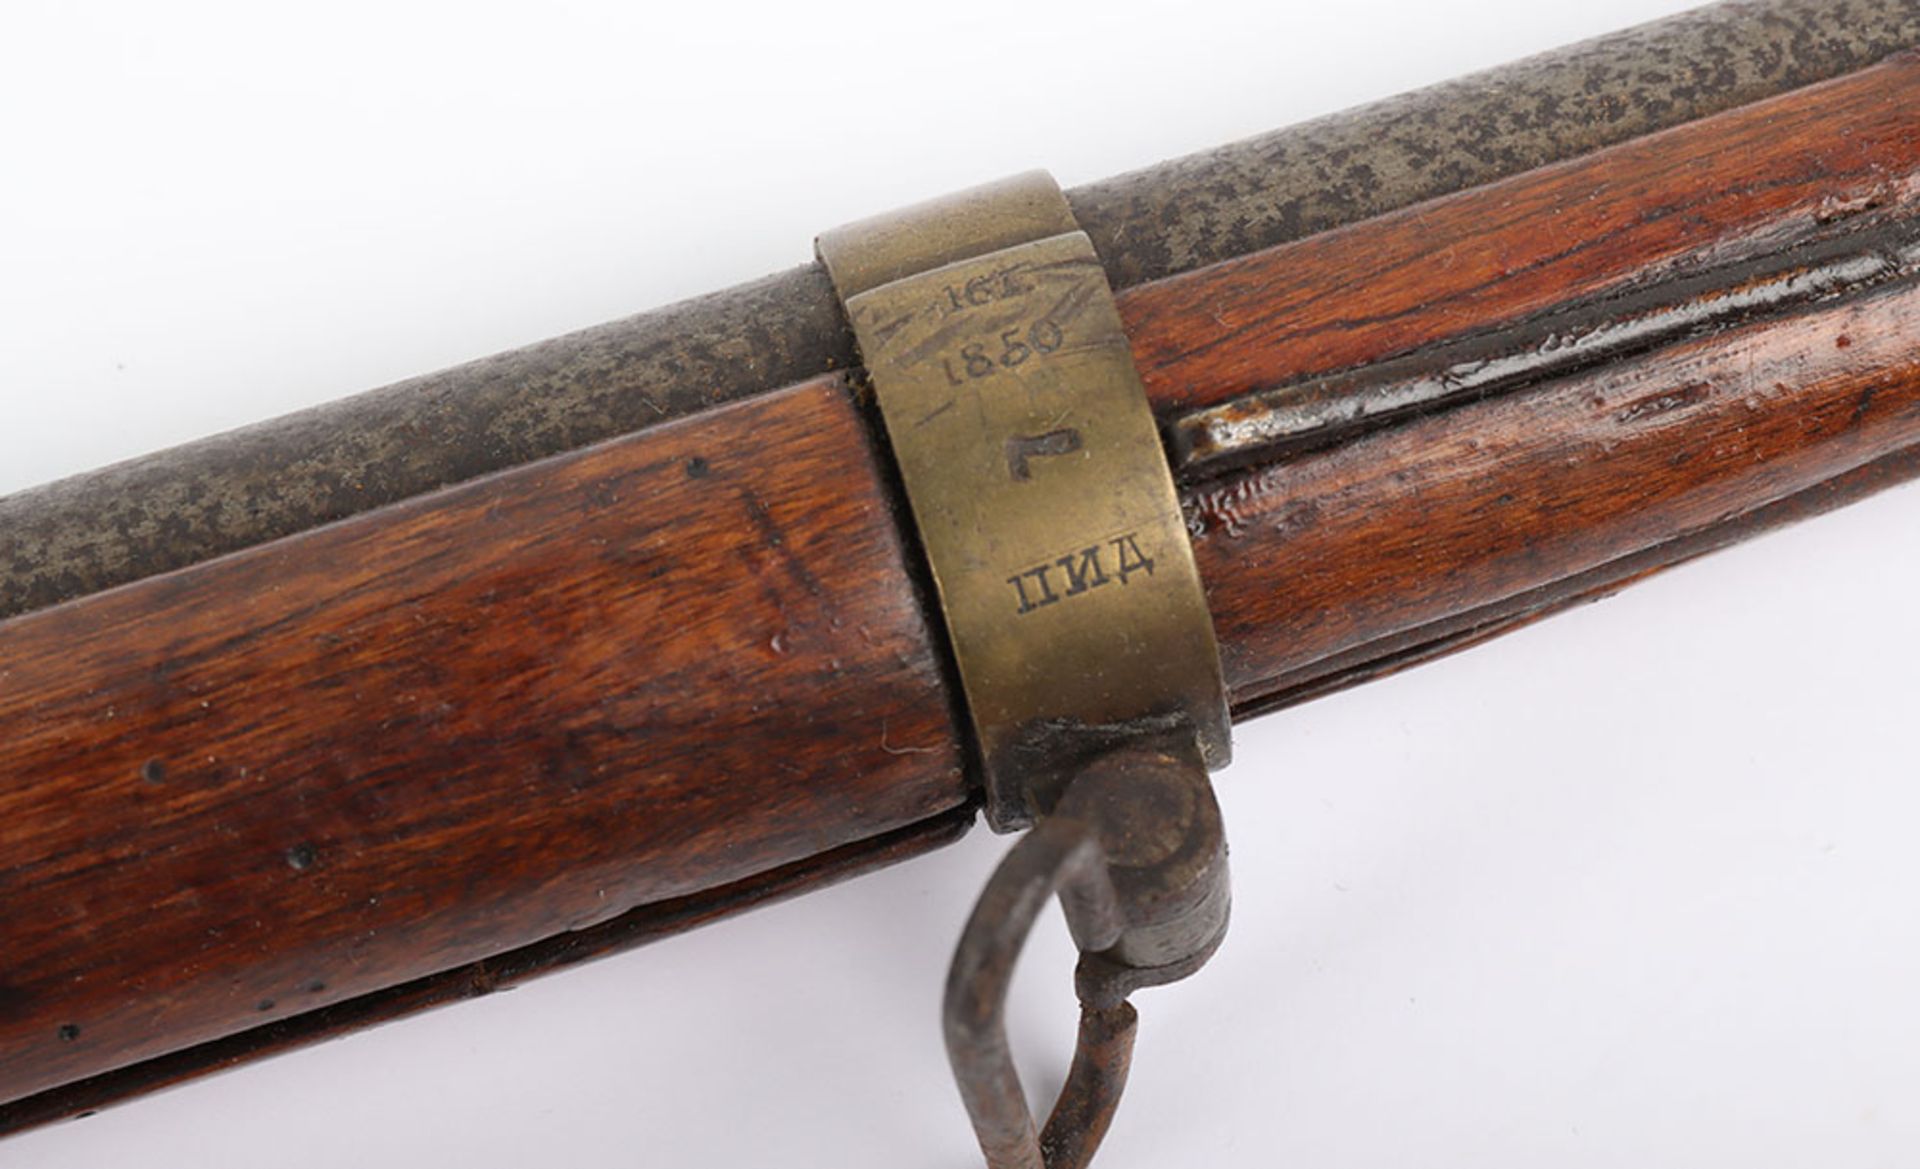 14-Bore Russian Back Action Military Musket - Image 7 of 17